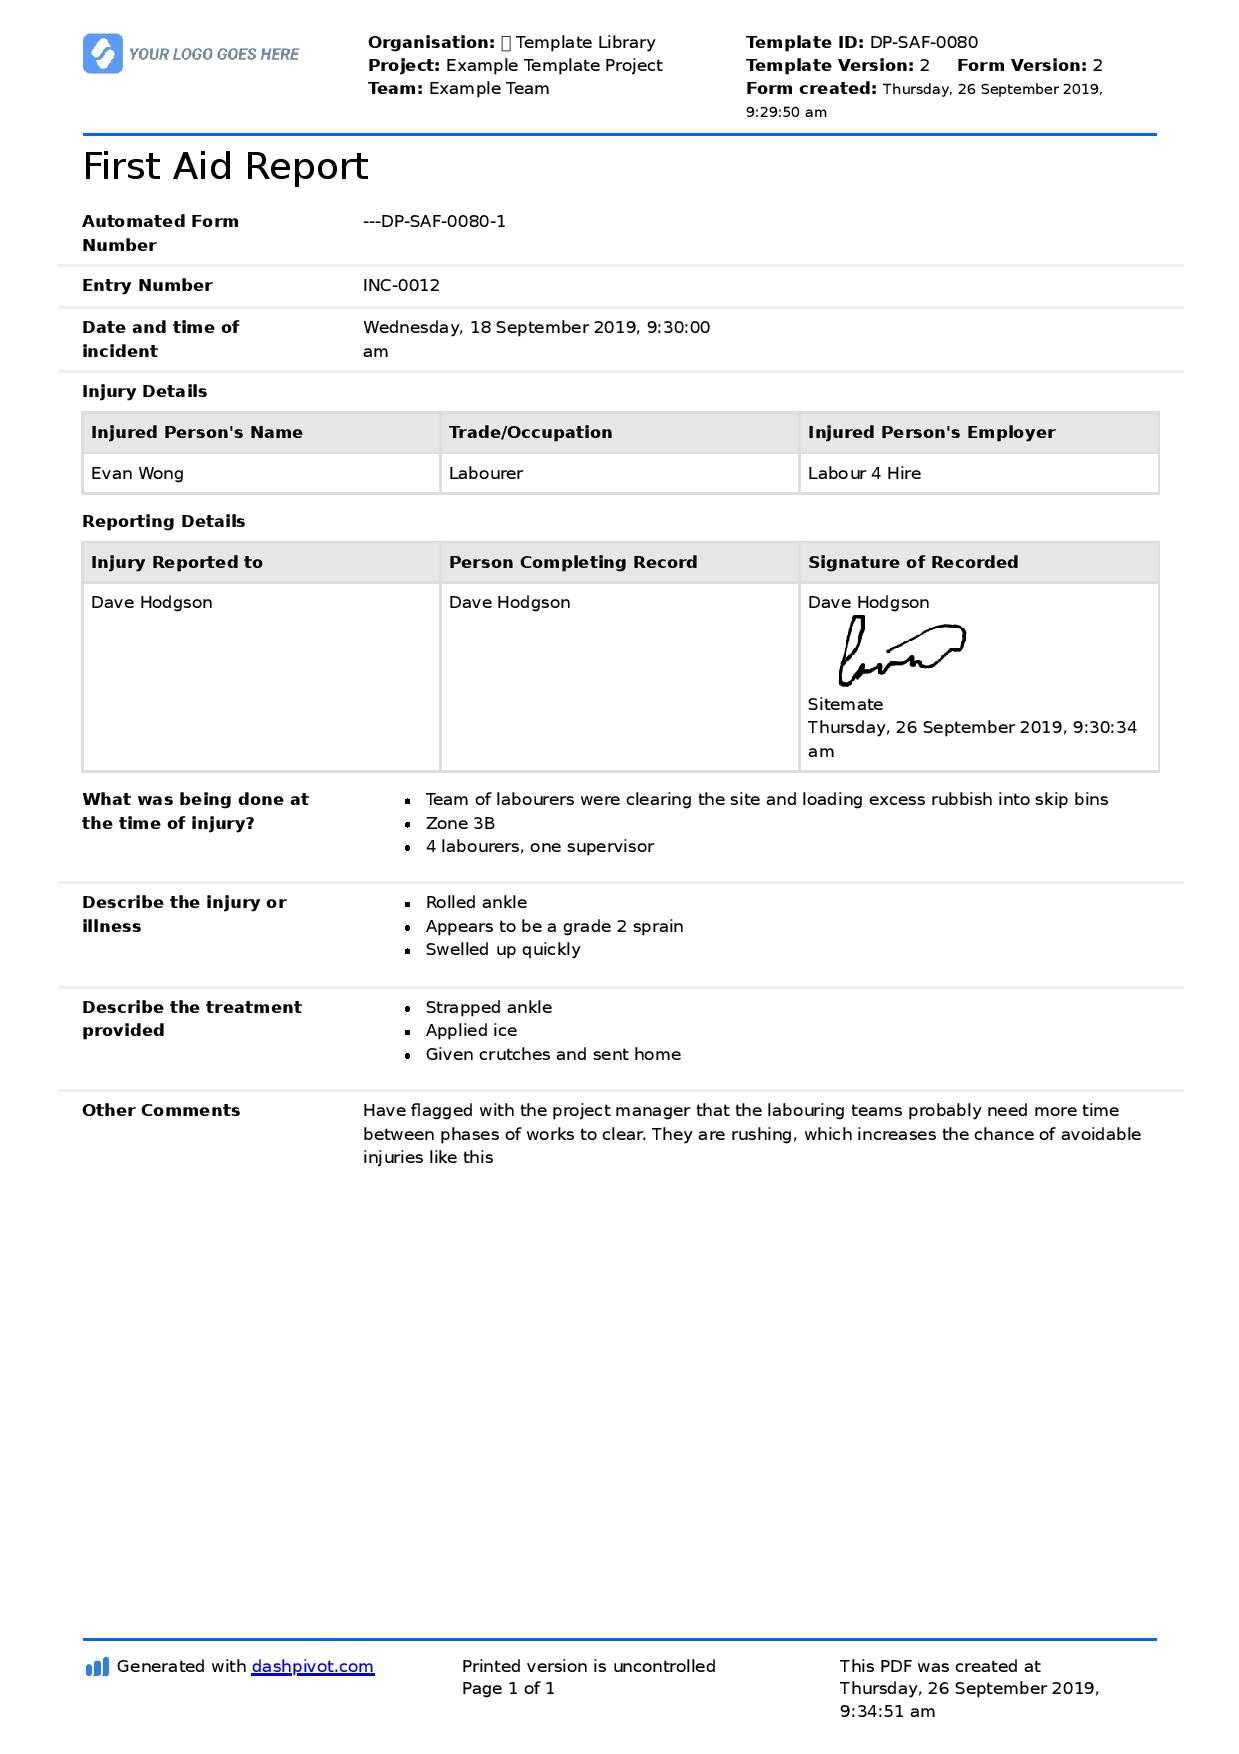 First Aid Report Form Template (Free To Use, Better Than Pdf) With Regard To First Aid Incident Report Form Template